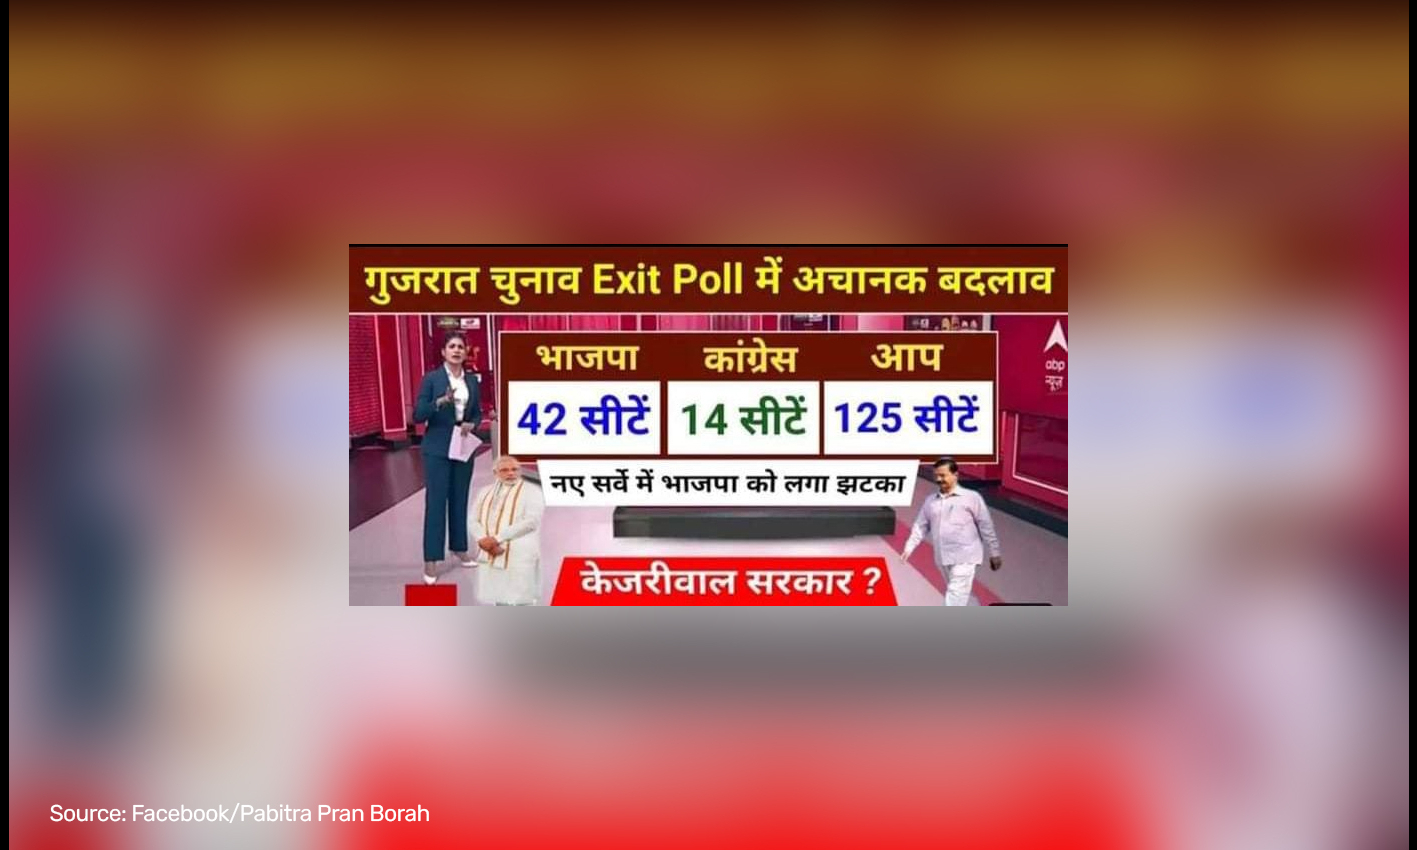 Exit poll shows AAP winning 125 seats in the 2022 Gujarat Legislative Assembly election.